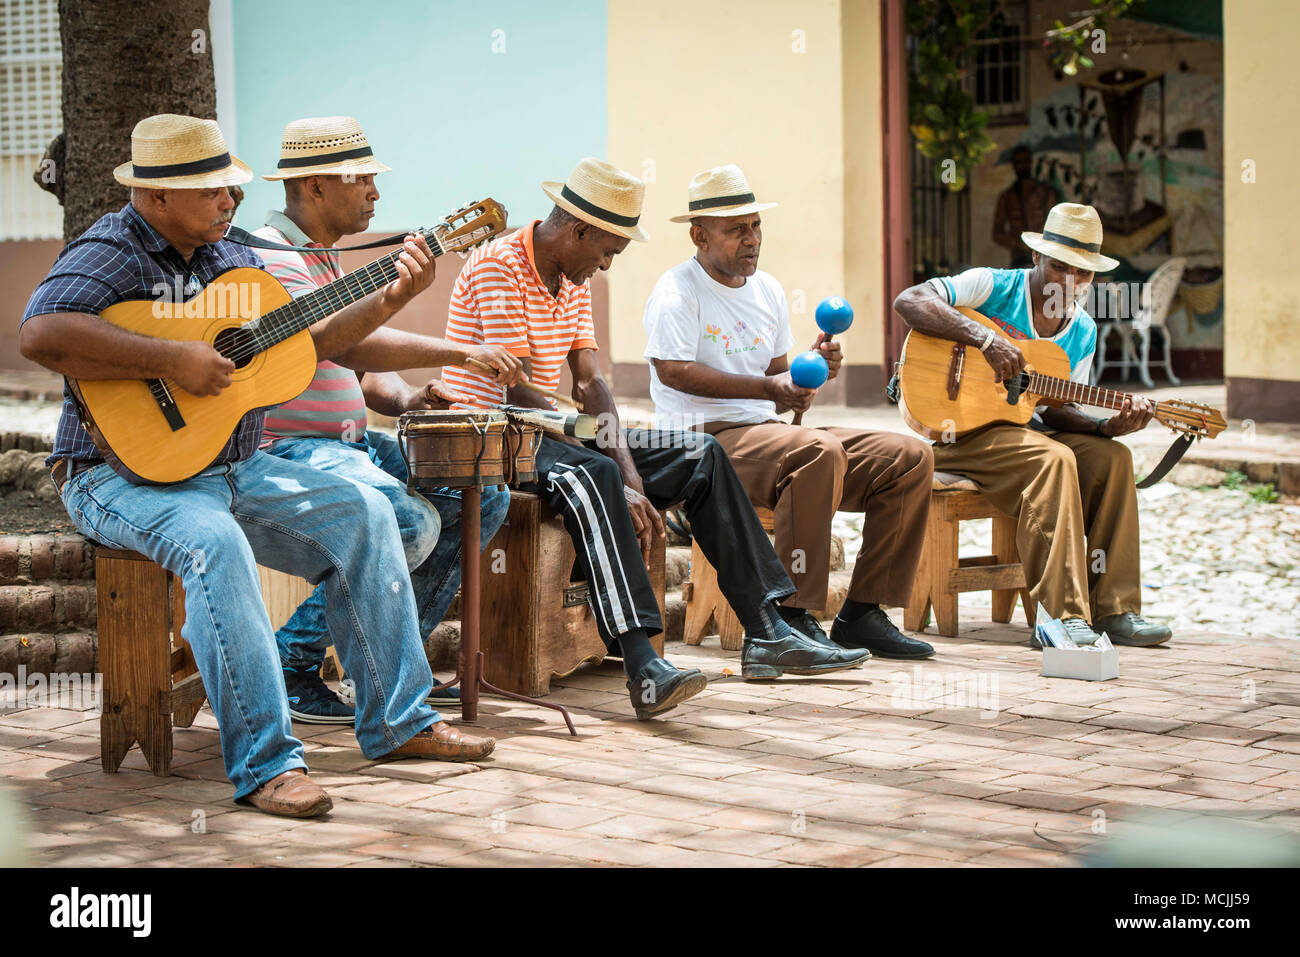 Cuban musicians play in the street in Trinidad, Cuba Stock Photo